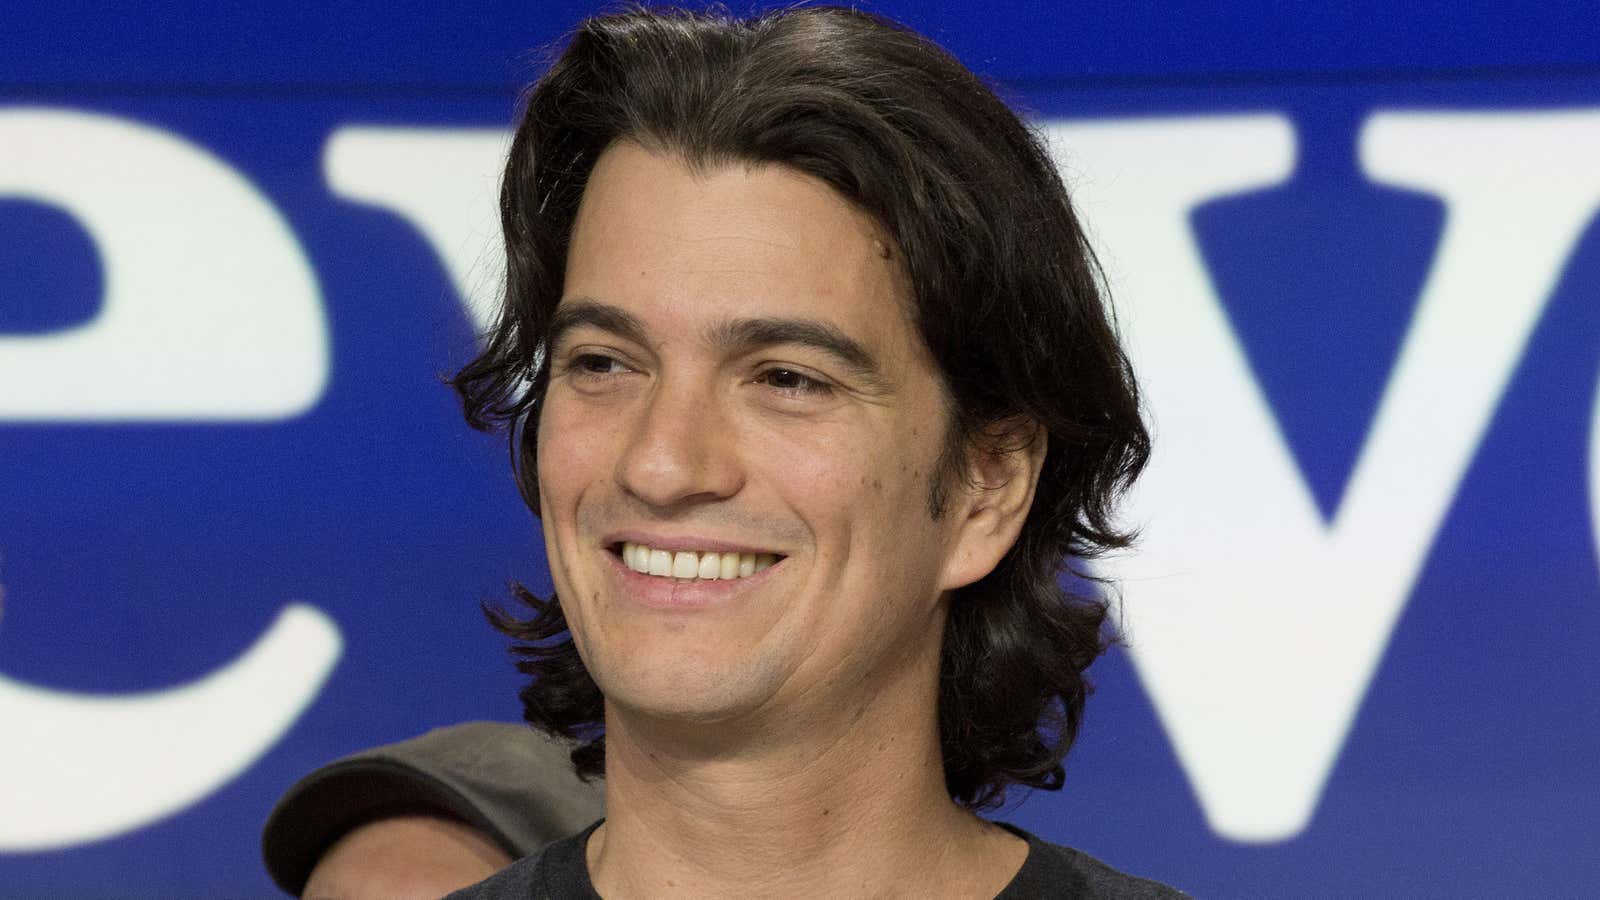 Adam Neumann, co-founder and CEO of WeWork, attends the opening bell ceremony at Nasdaq, Tuesday, Jan. 16, 2018, in New York. WeWork is a privately…